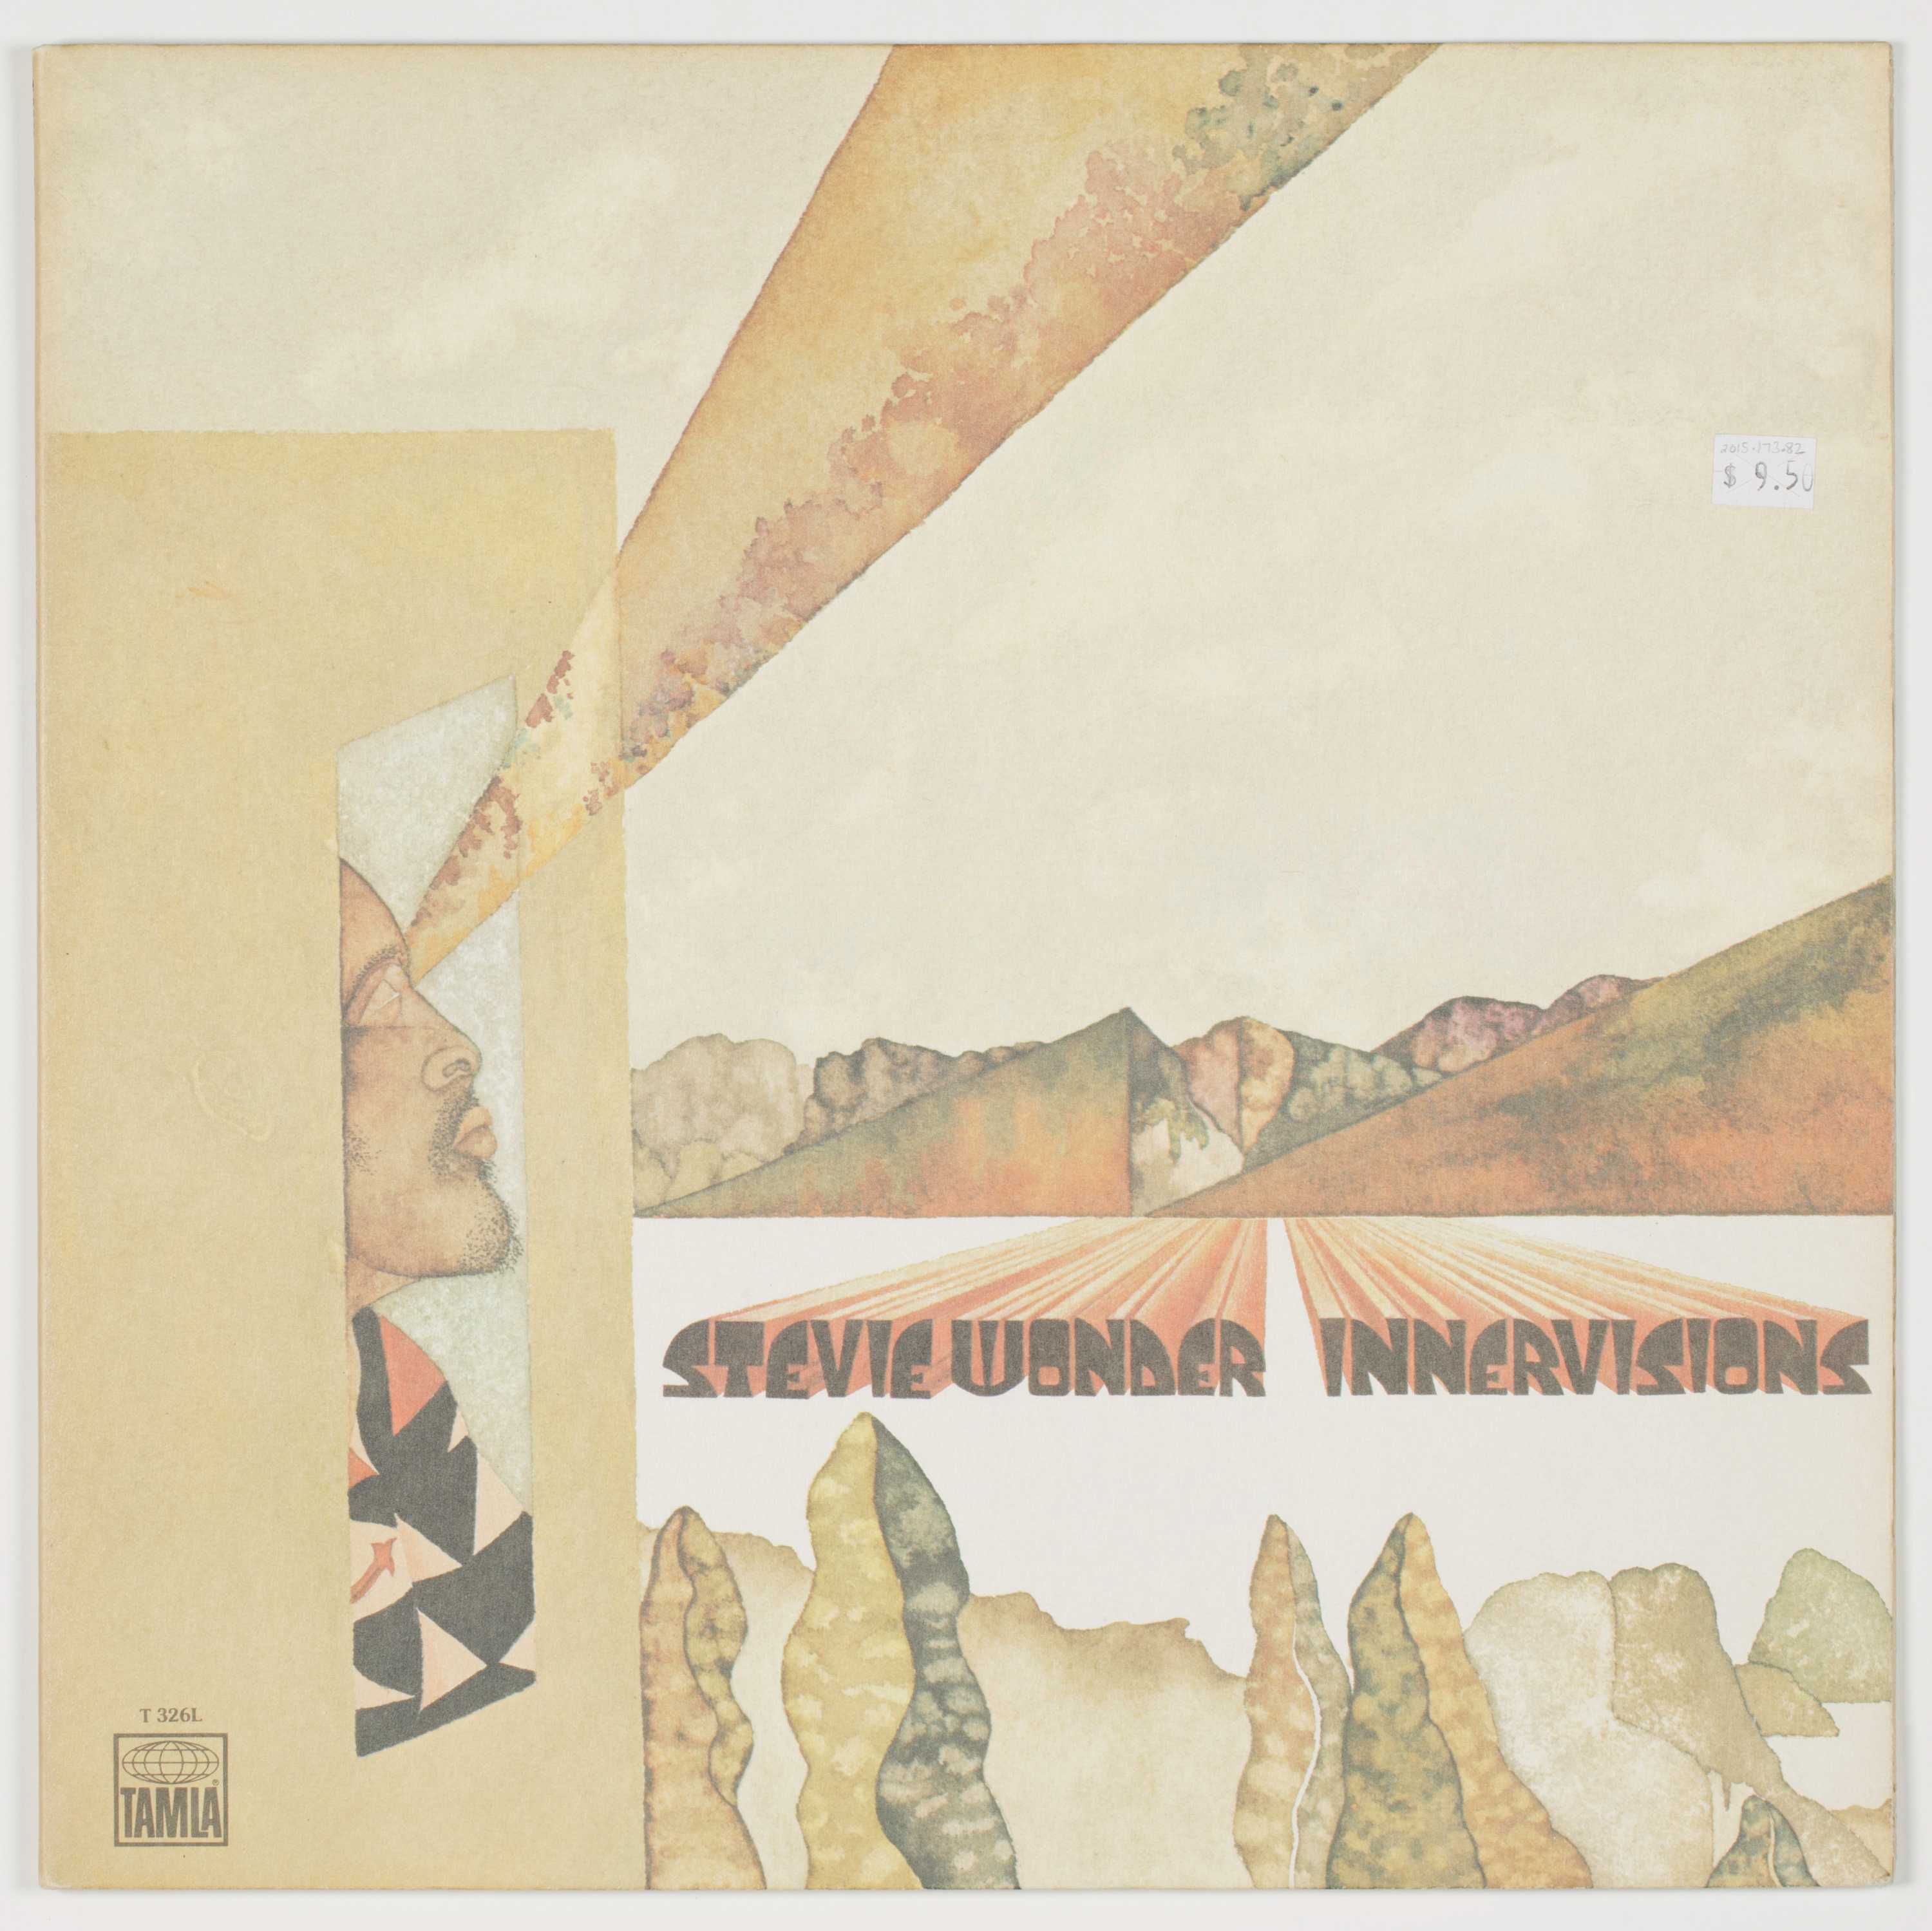 The album art is of a serene and ethereal pale watercolored landscape, with Stevie Wonder looking into the sky.